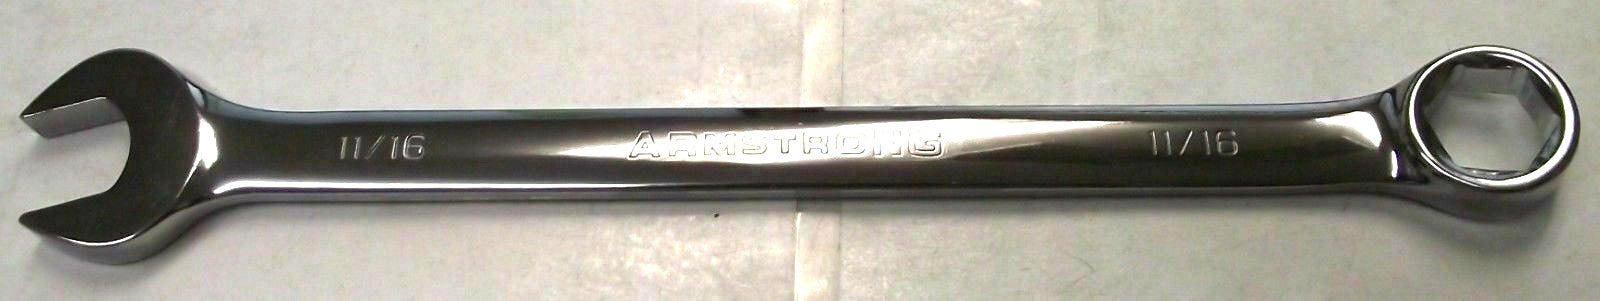 ARMSTRONG 25-322 11/16" COMBINATION WRENCH FULL POLISH 6 POINT USA